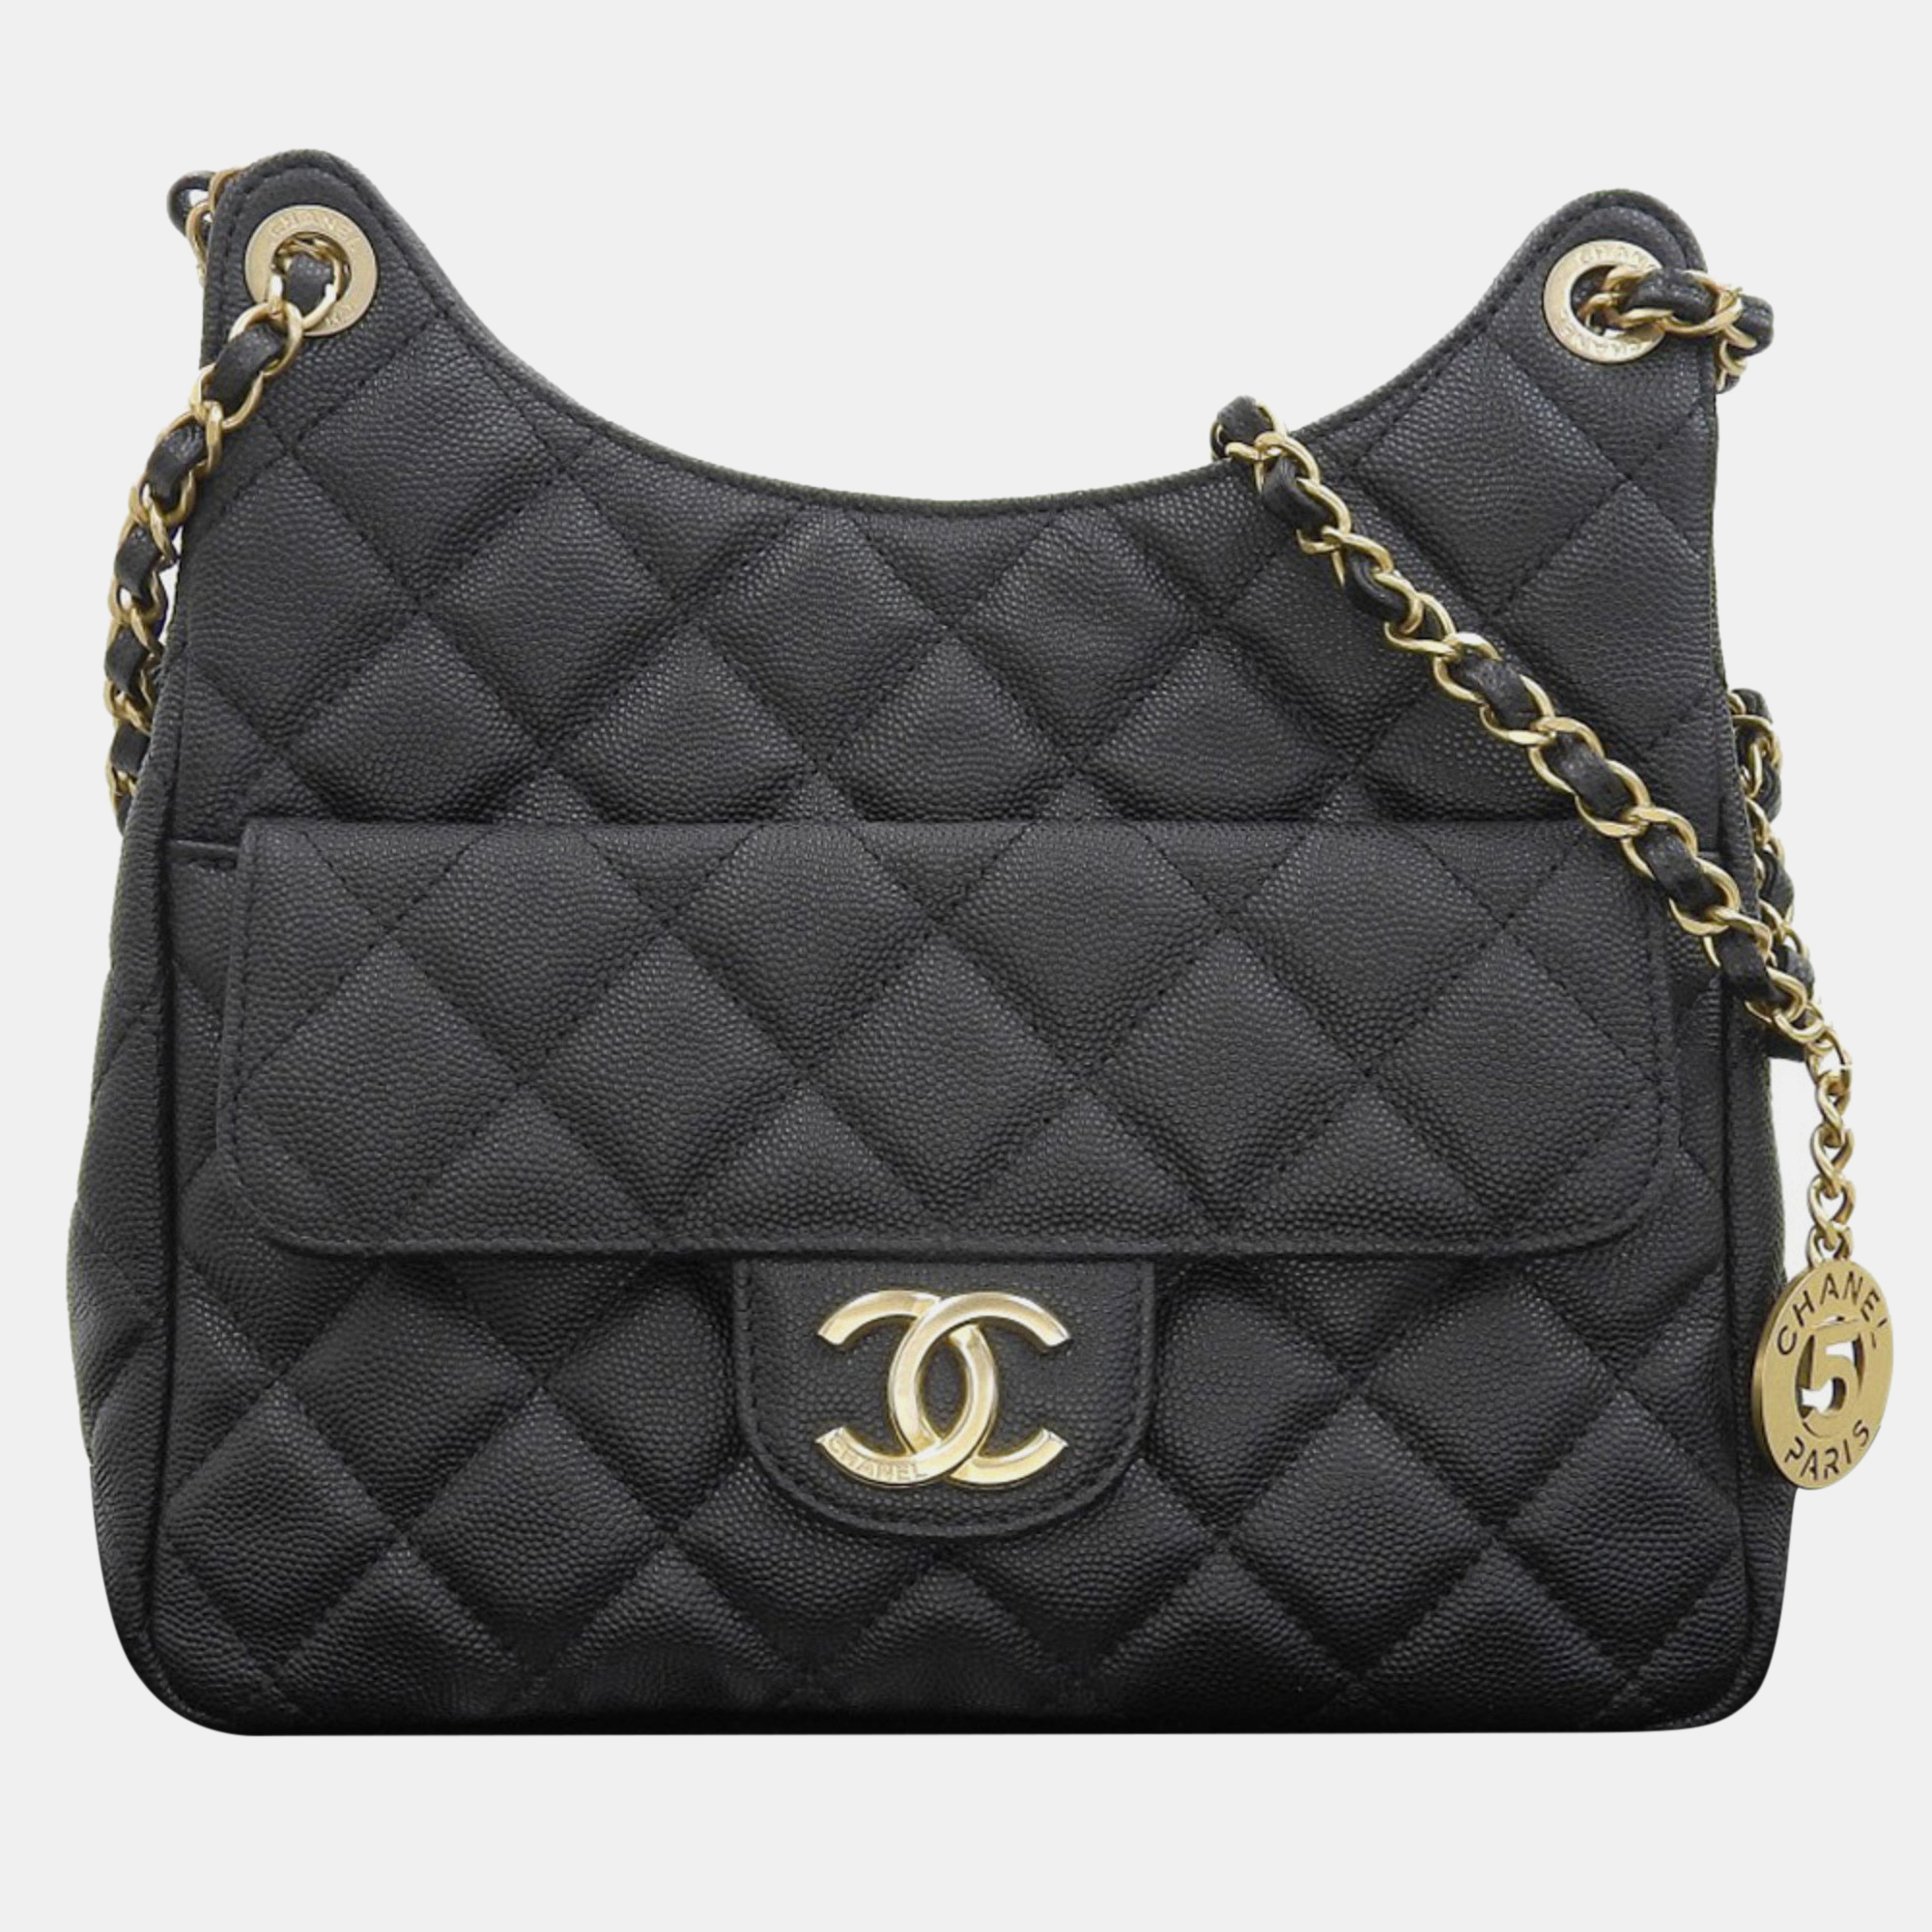 Chanel black caviar quilted wavy cc hobo bag